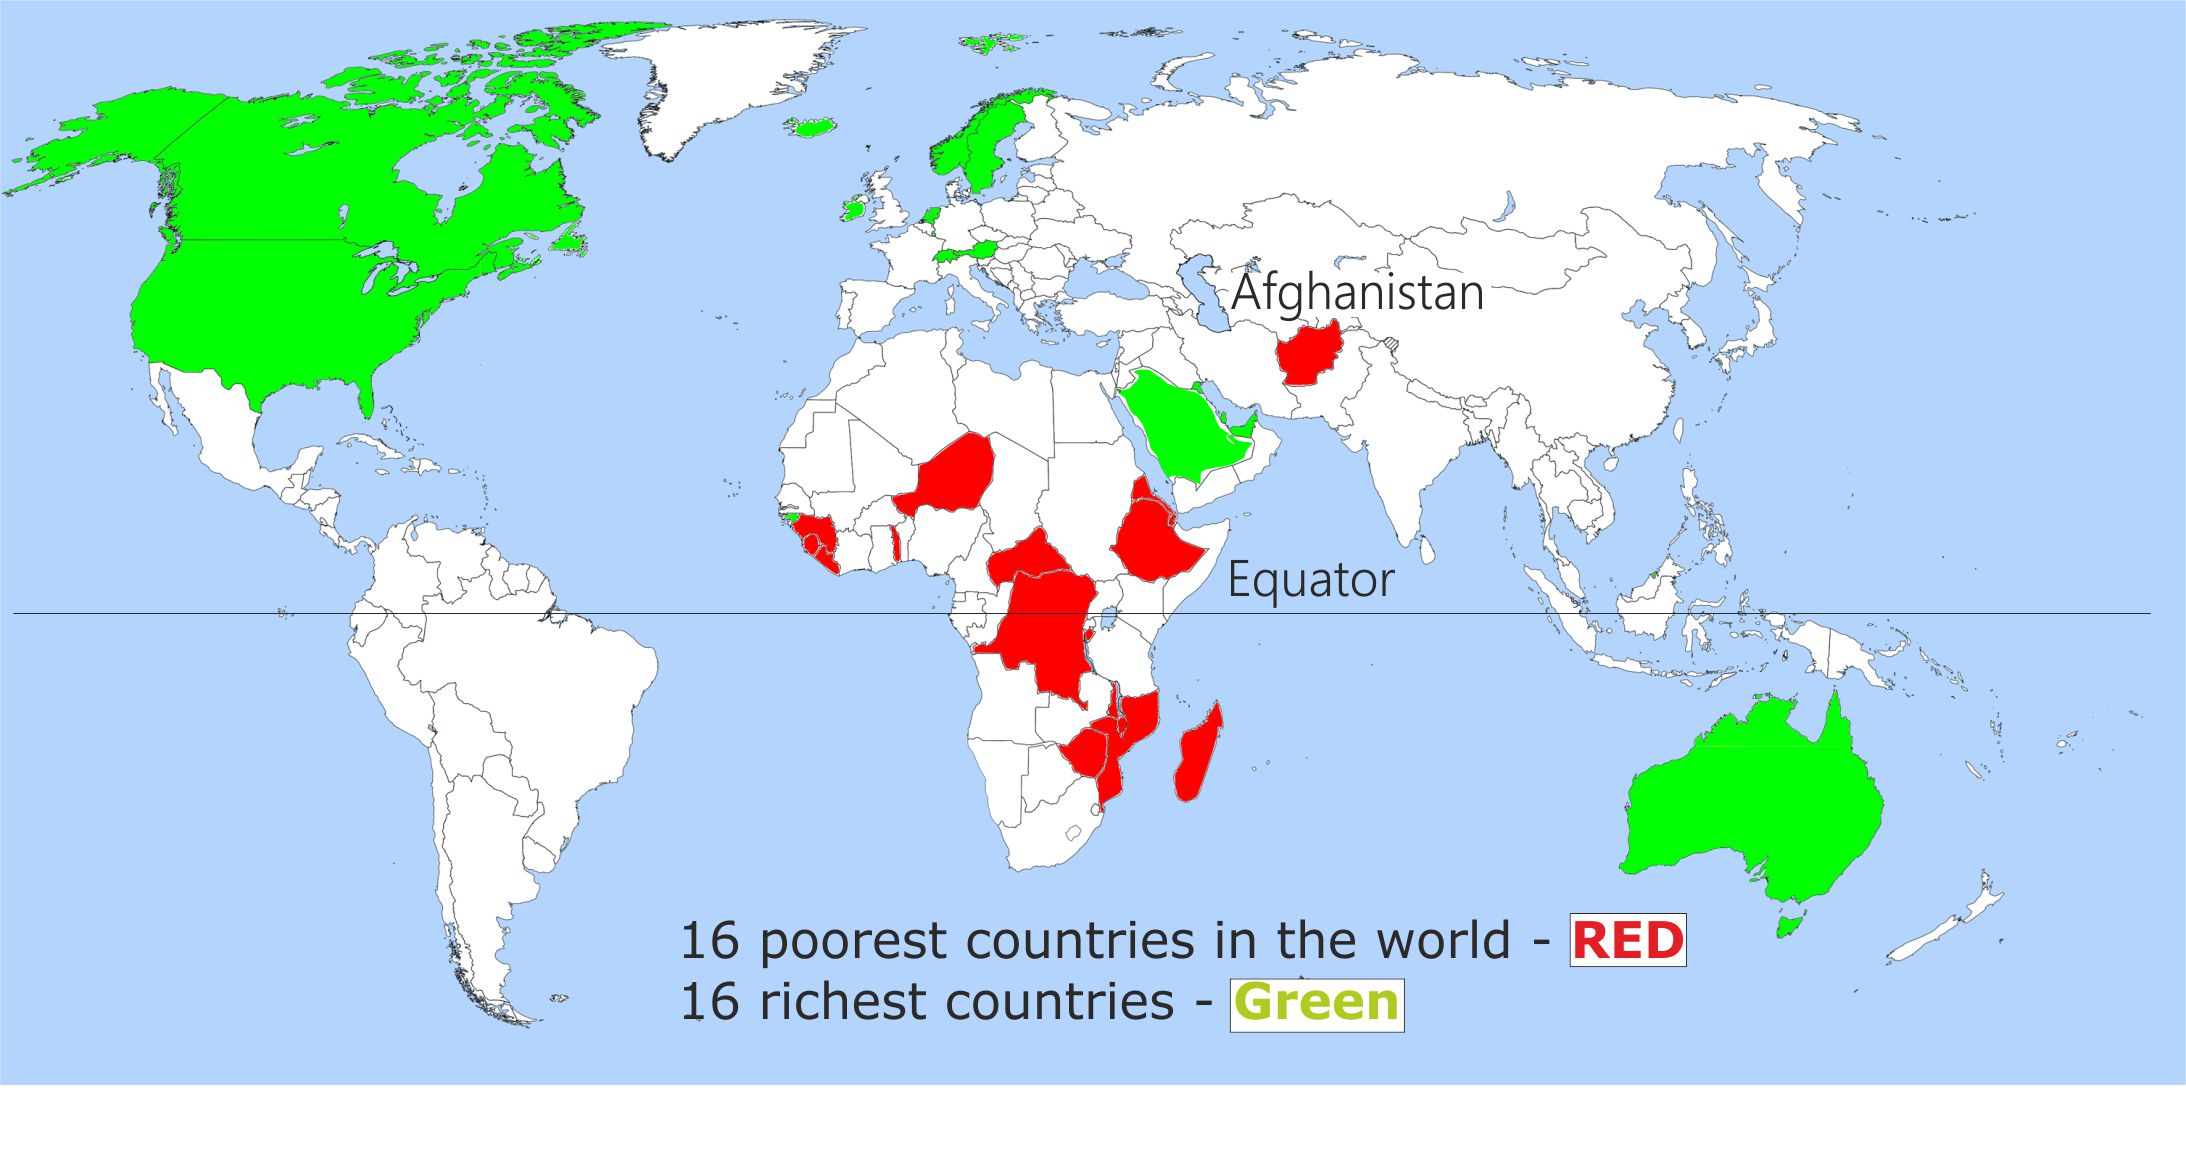 Rich and poor countries